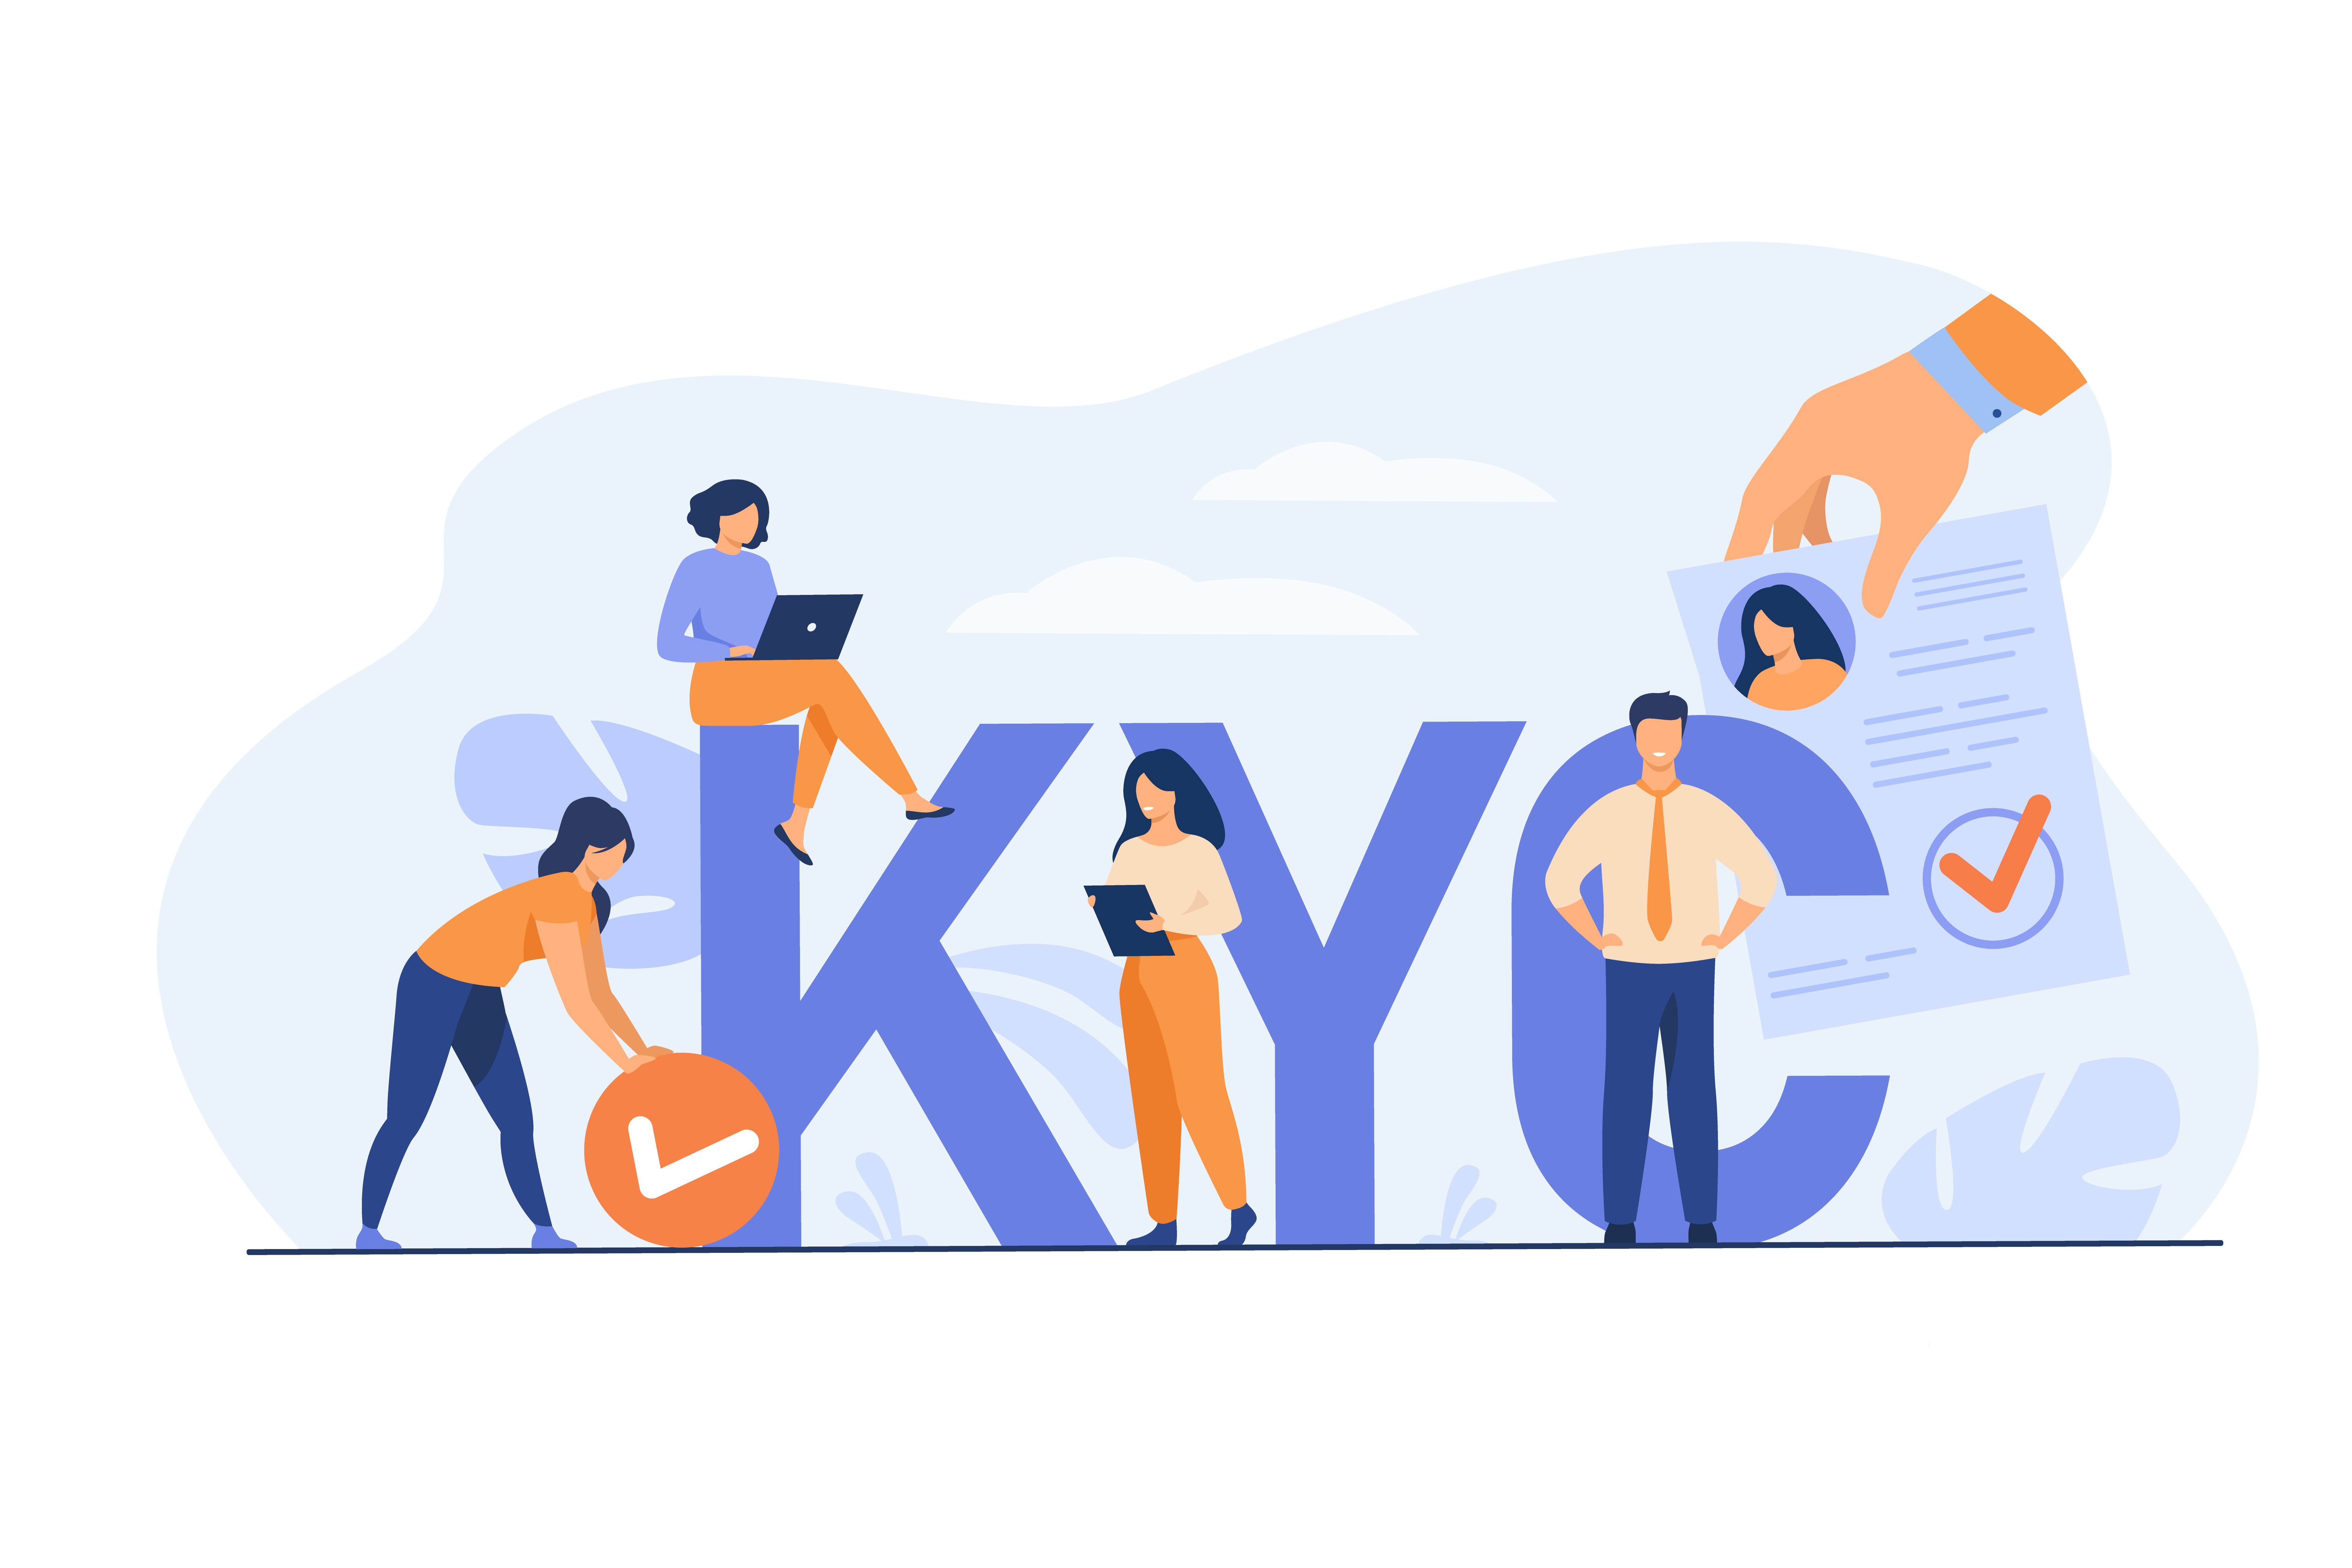 KYC Image | Image by pch.vector on Freepik